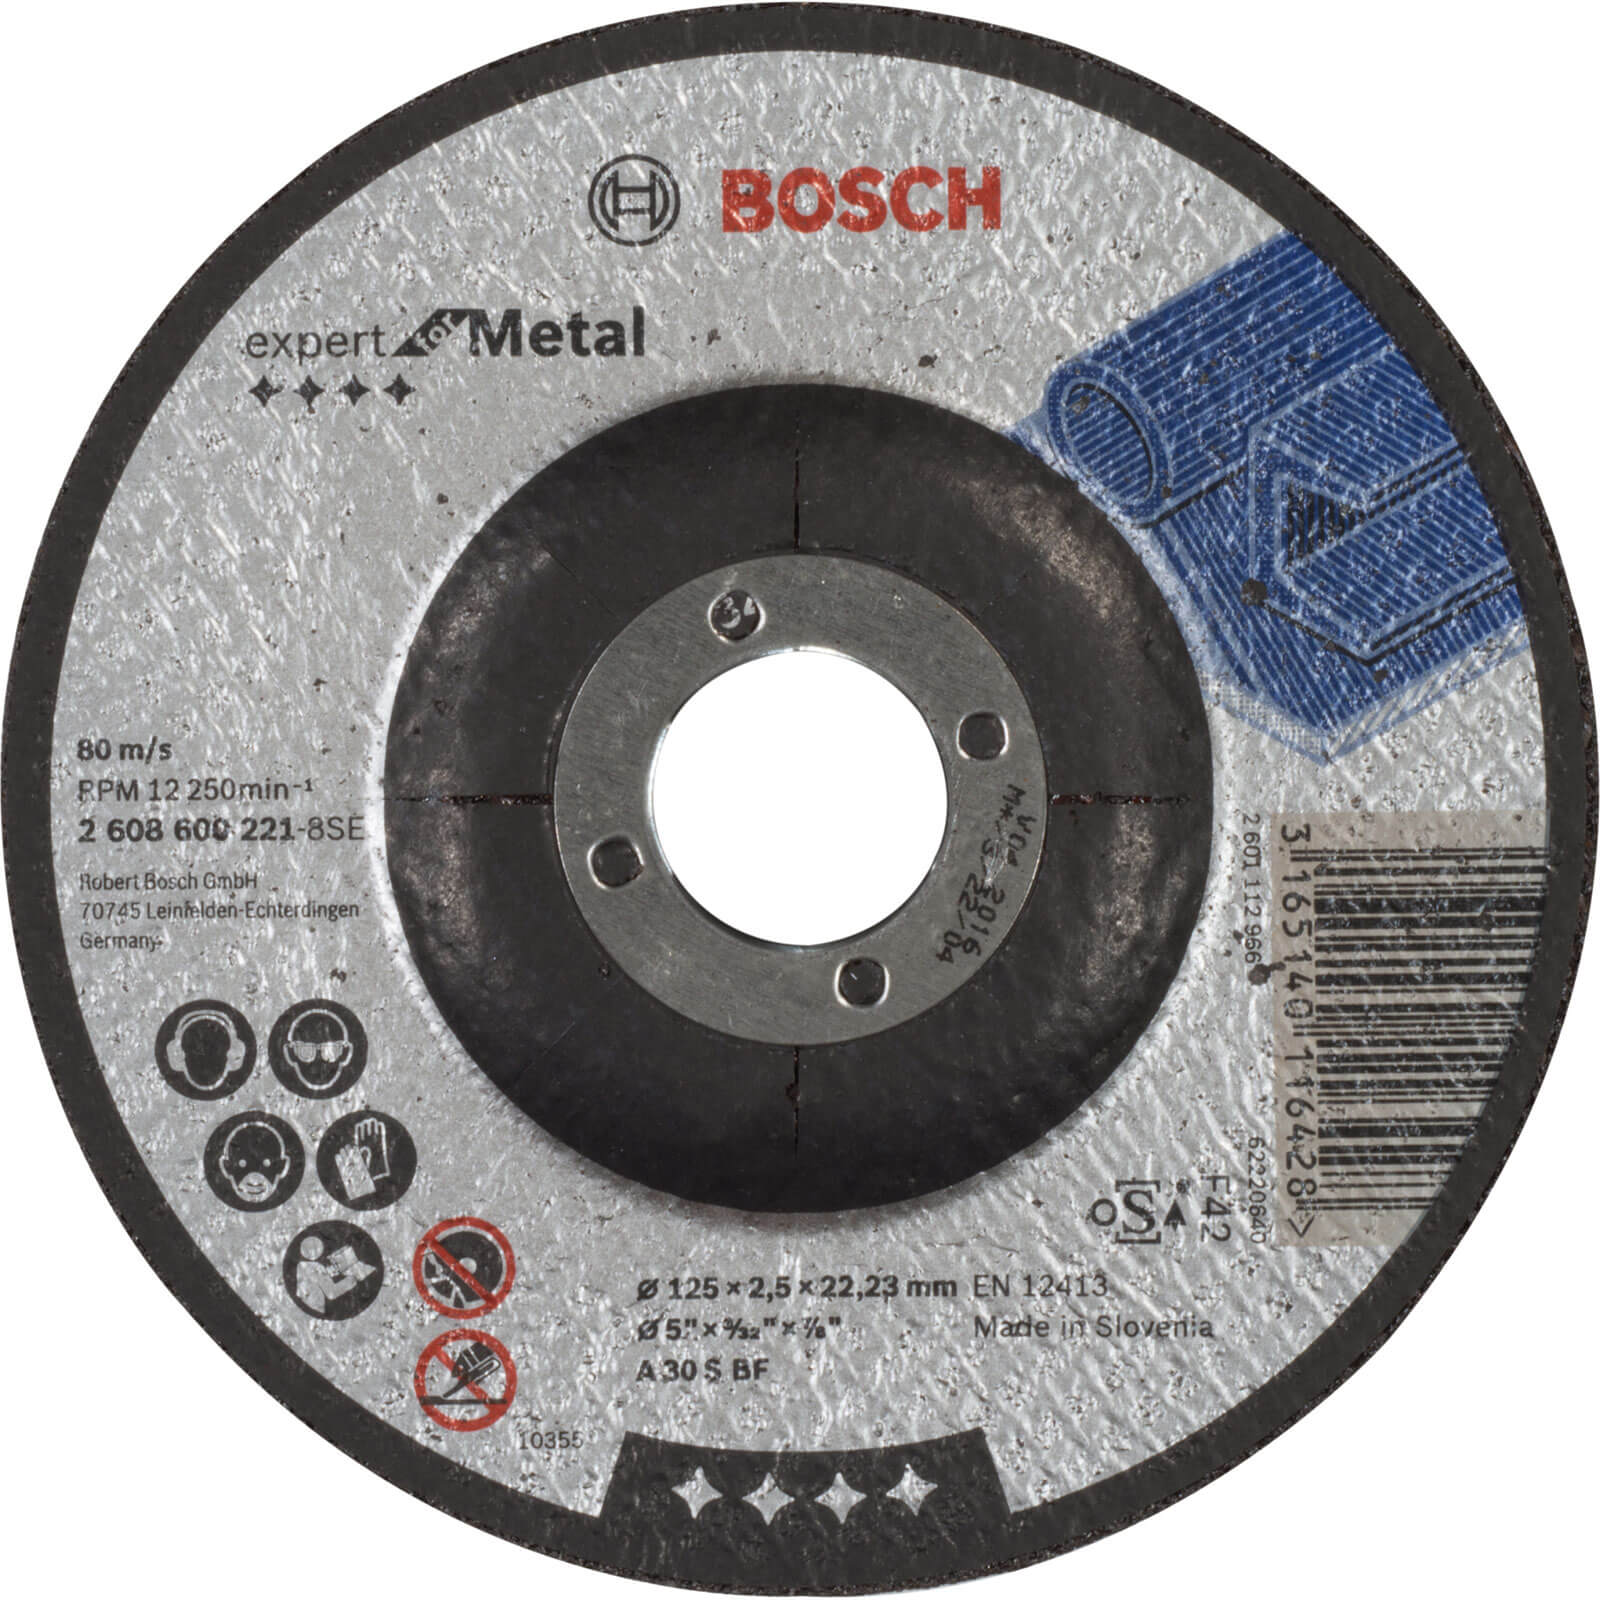 Photo of Bosch A30s Bf Depressed Centre Metal Cutting Disc 125mm